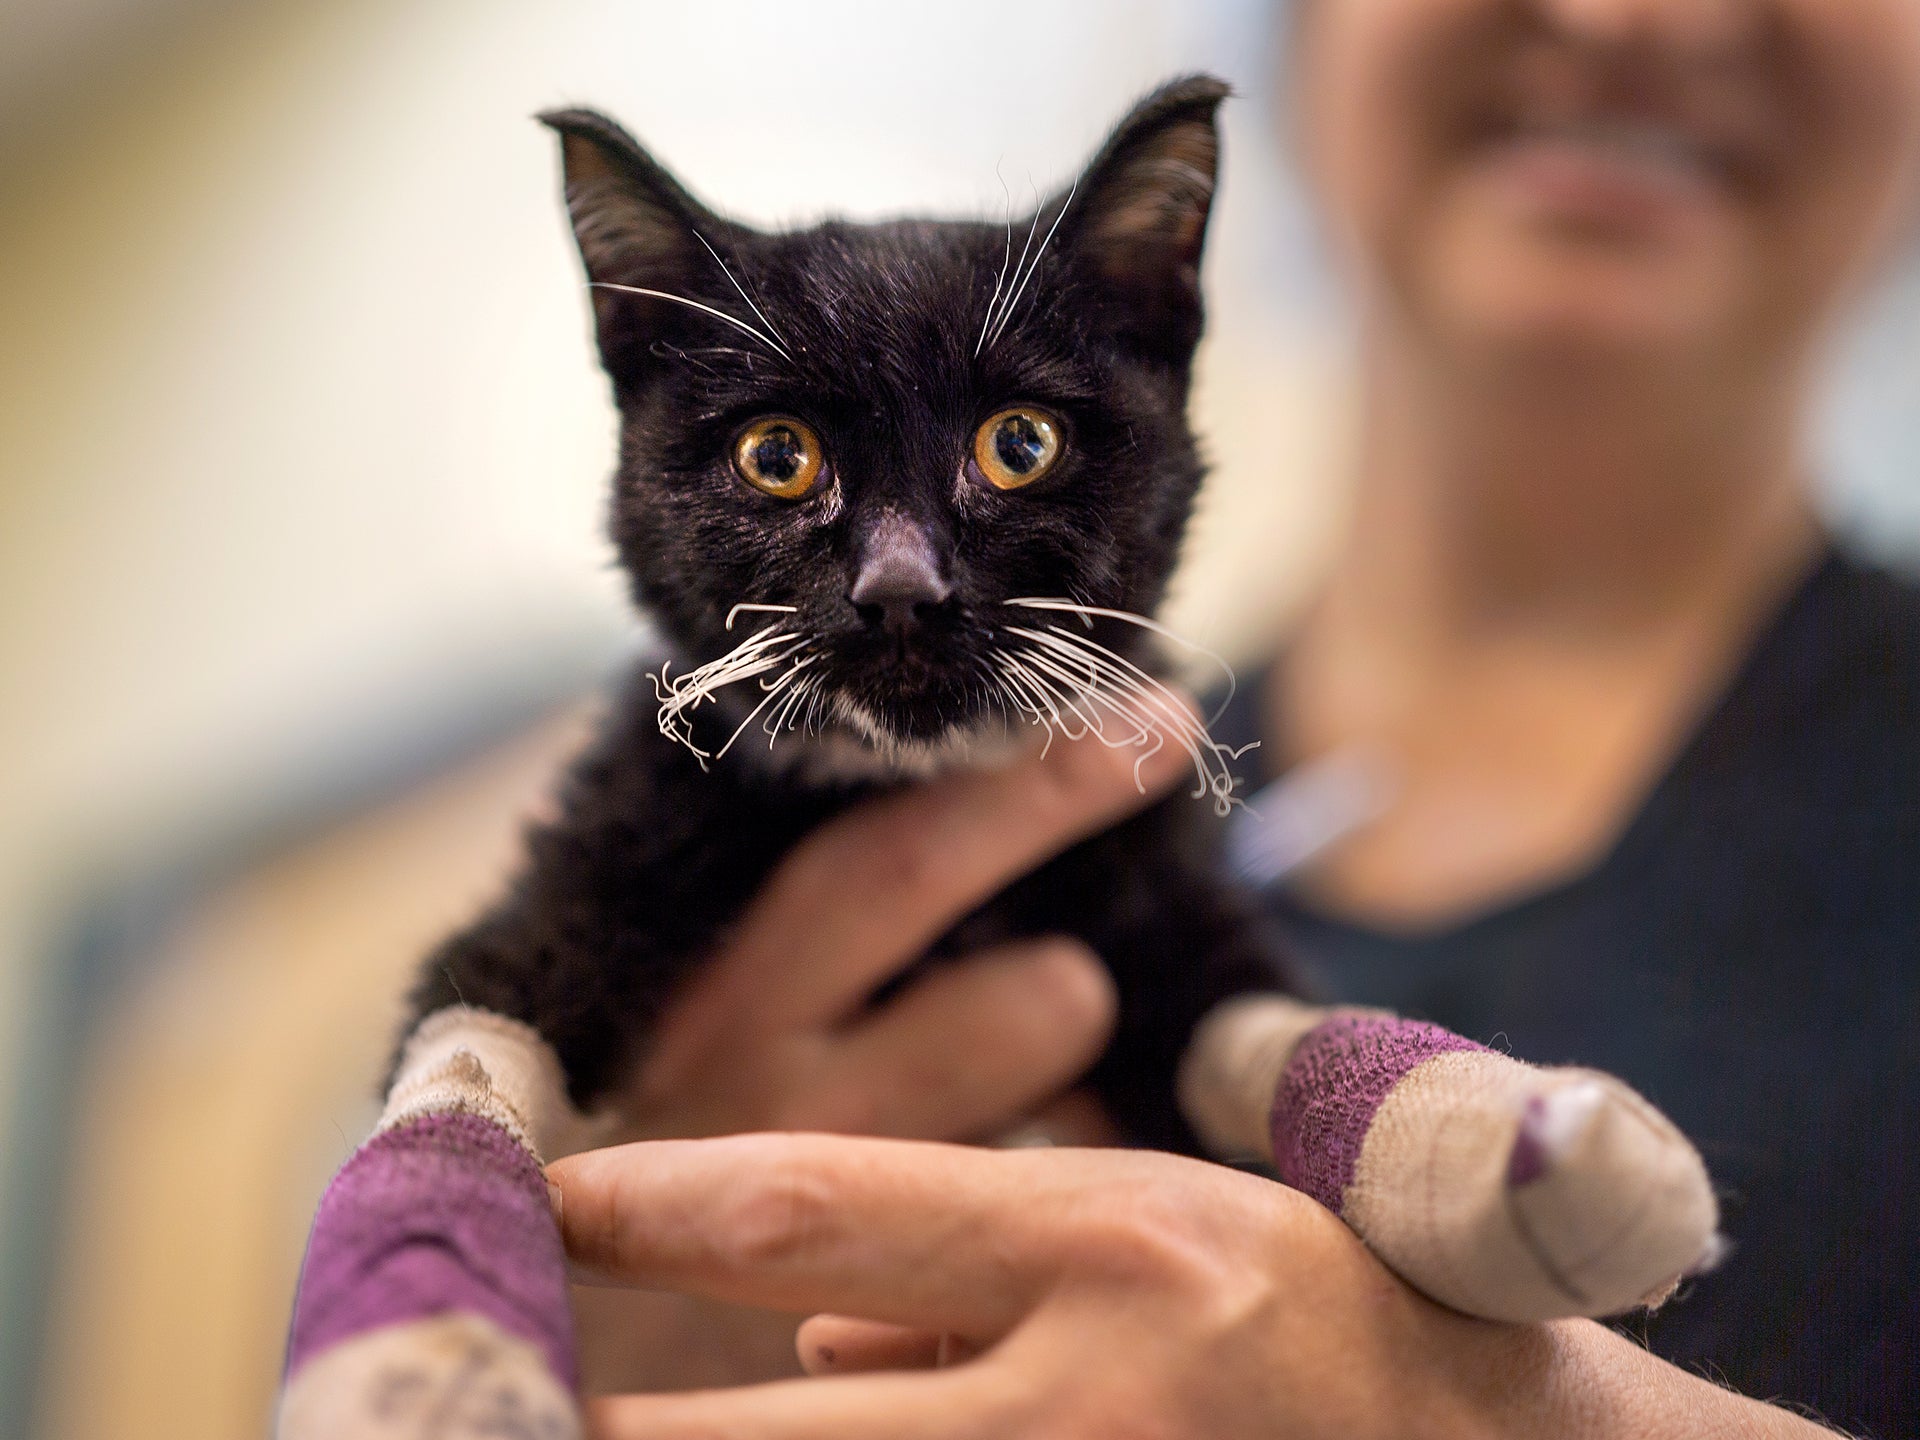 UC Davis veterinarian Jamie Peyton smiles while holding up a black cat with bandaged paws up to the camera for a photo.